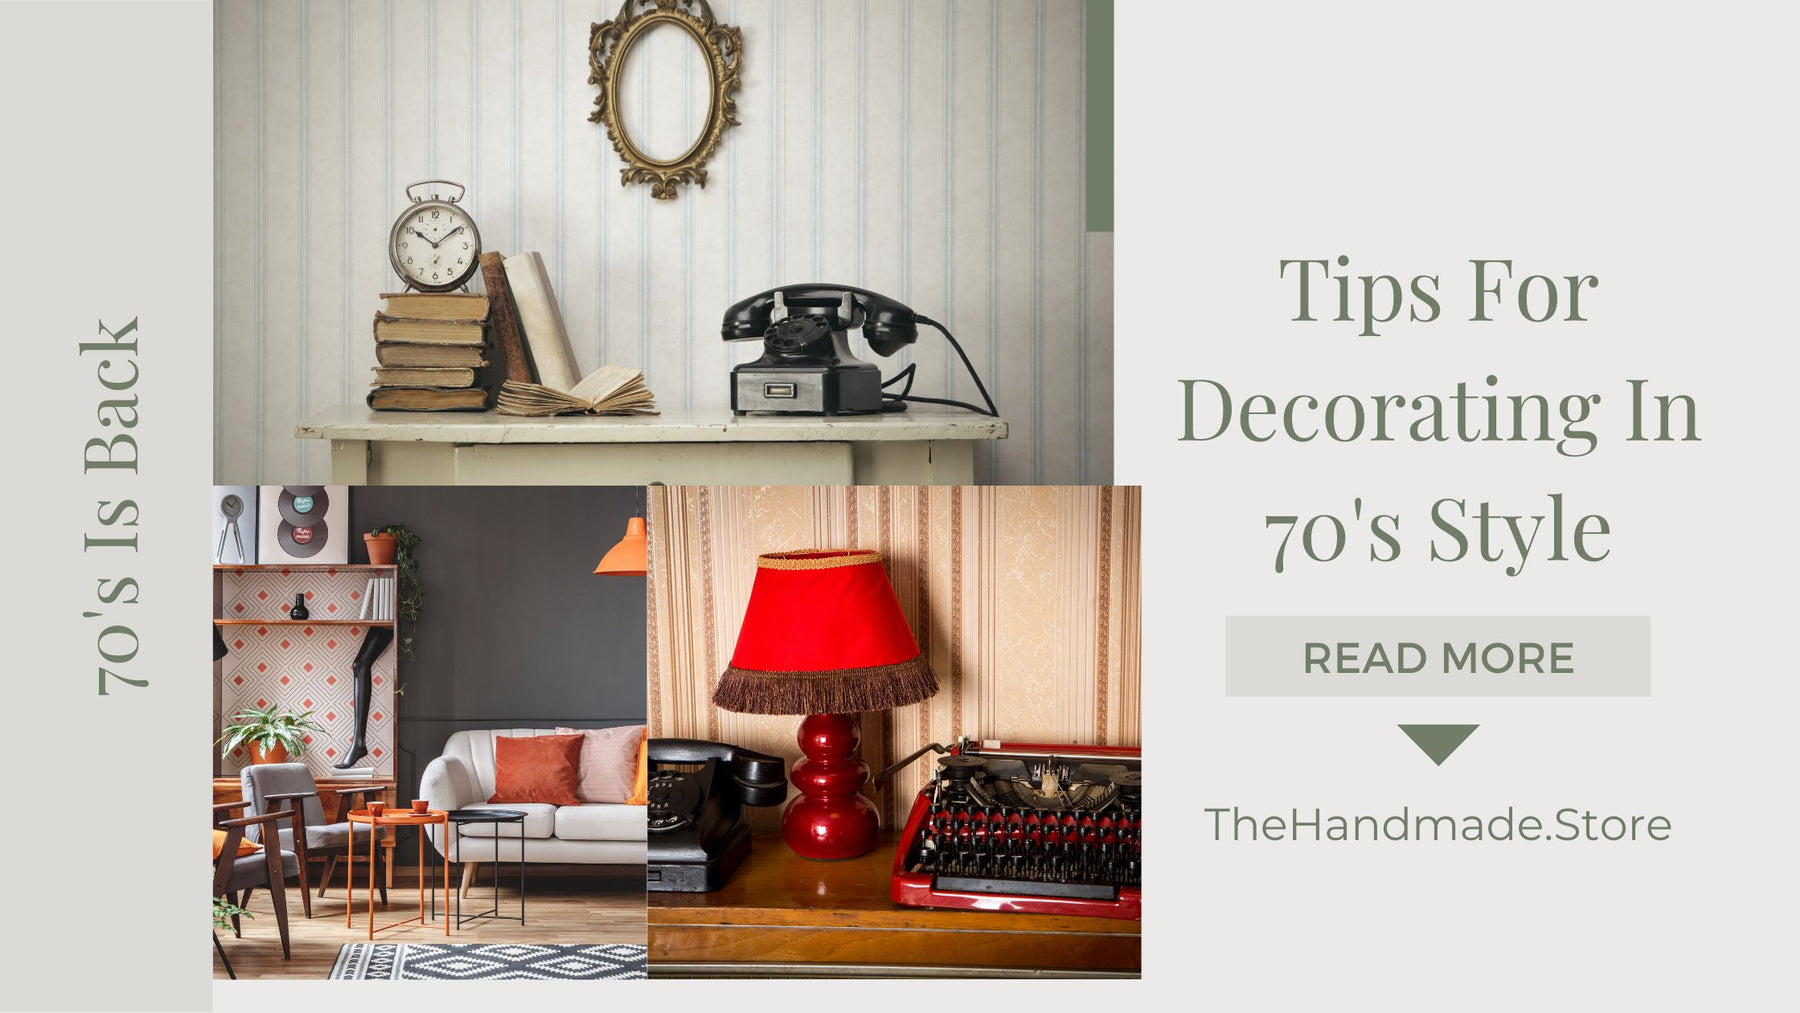 7 Tips to Decorate Your Home Interiors 70's Style! - The Handmade Store